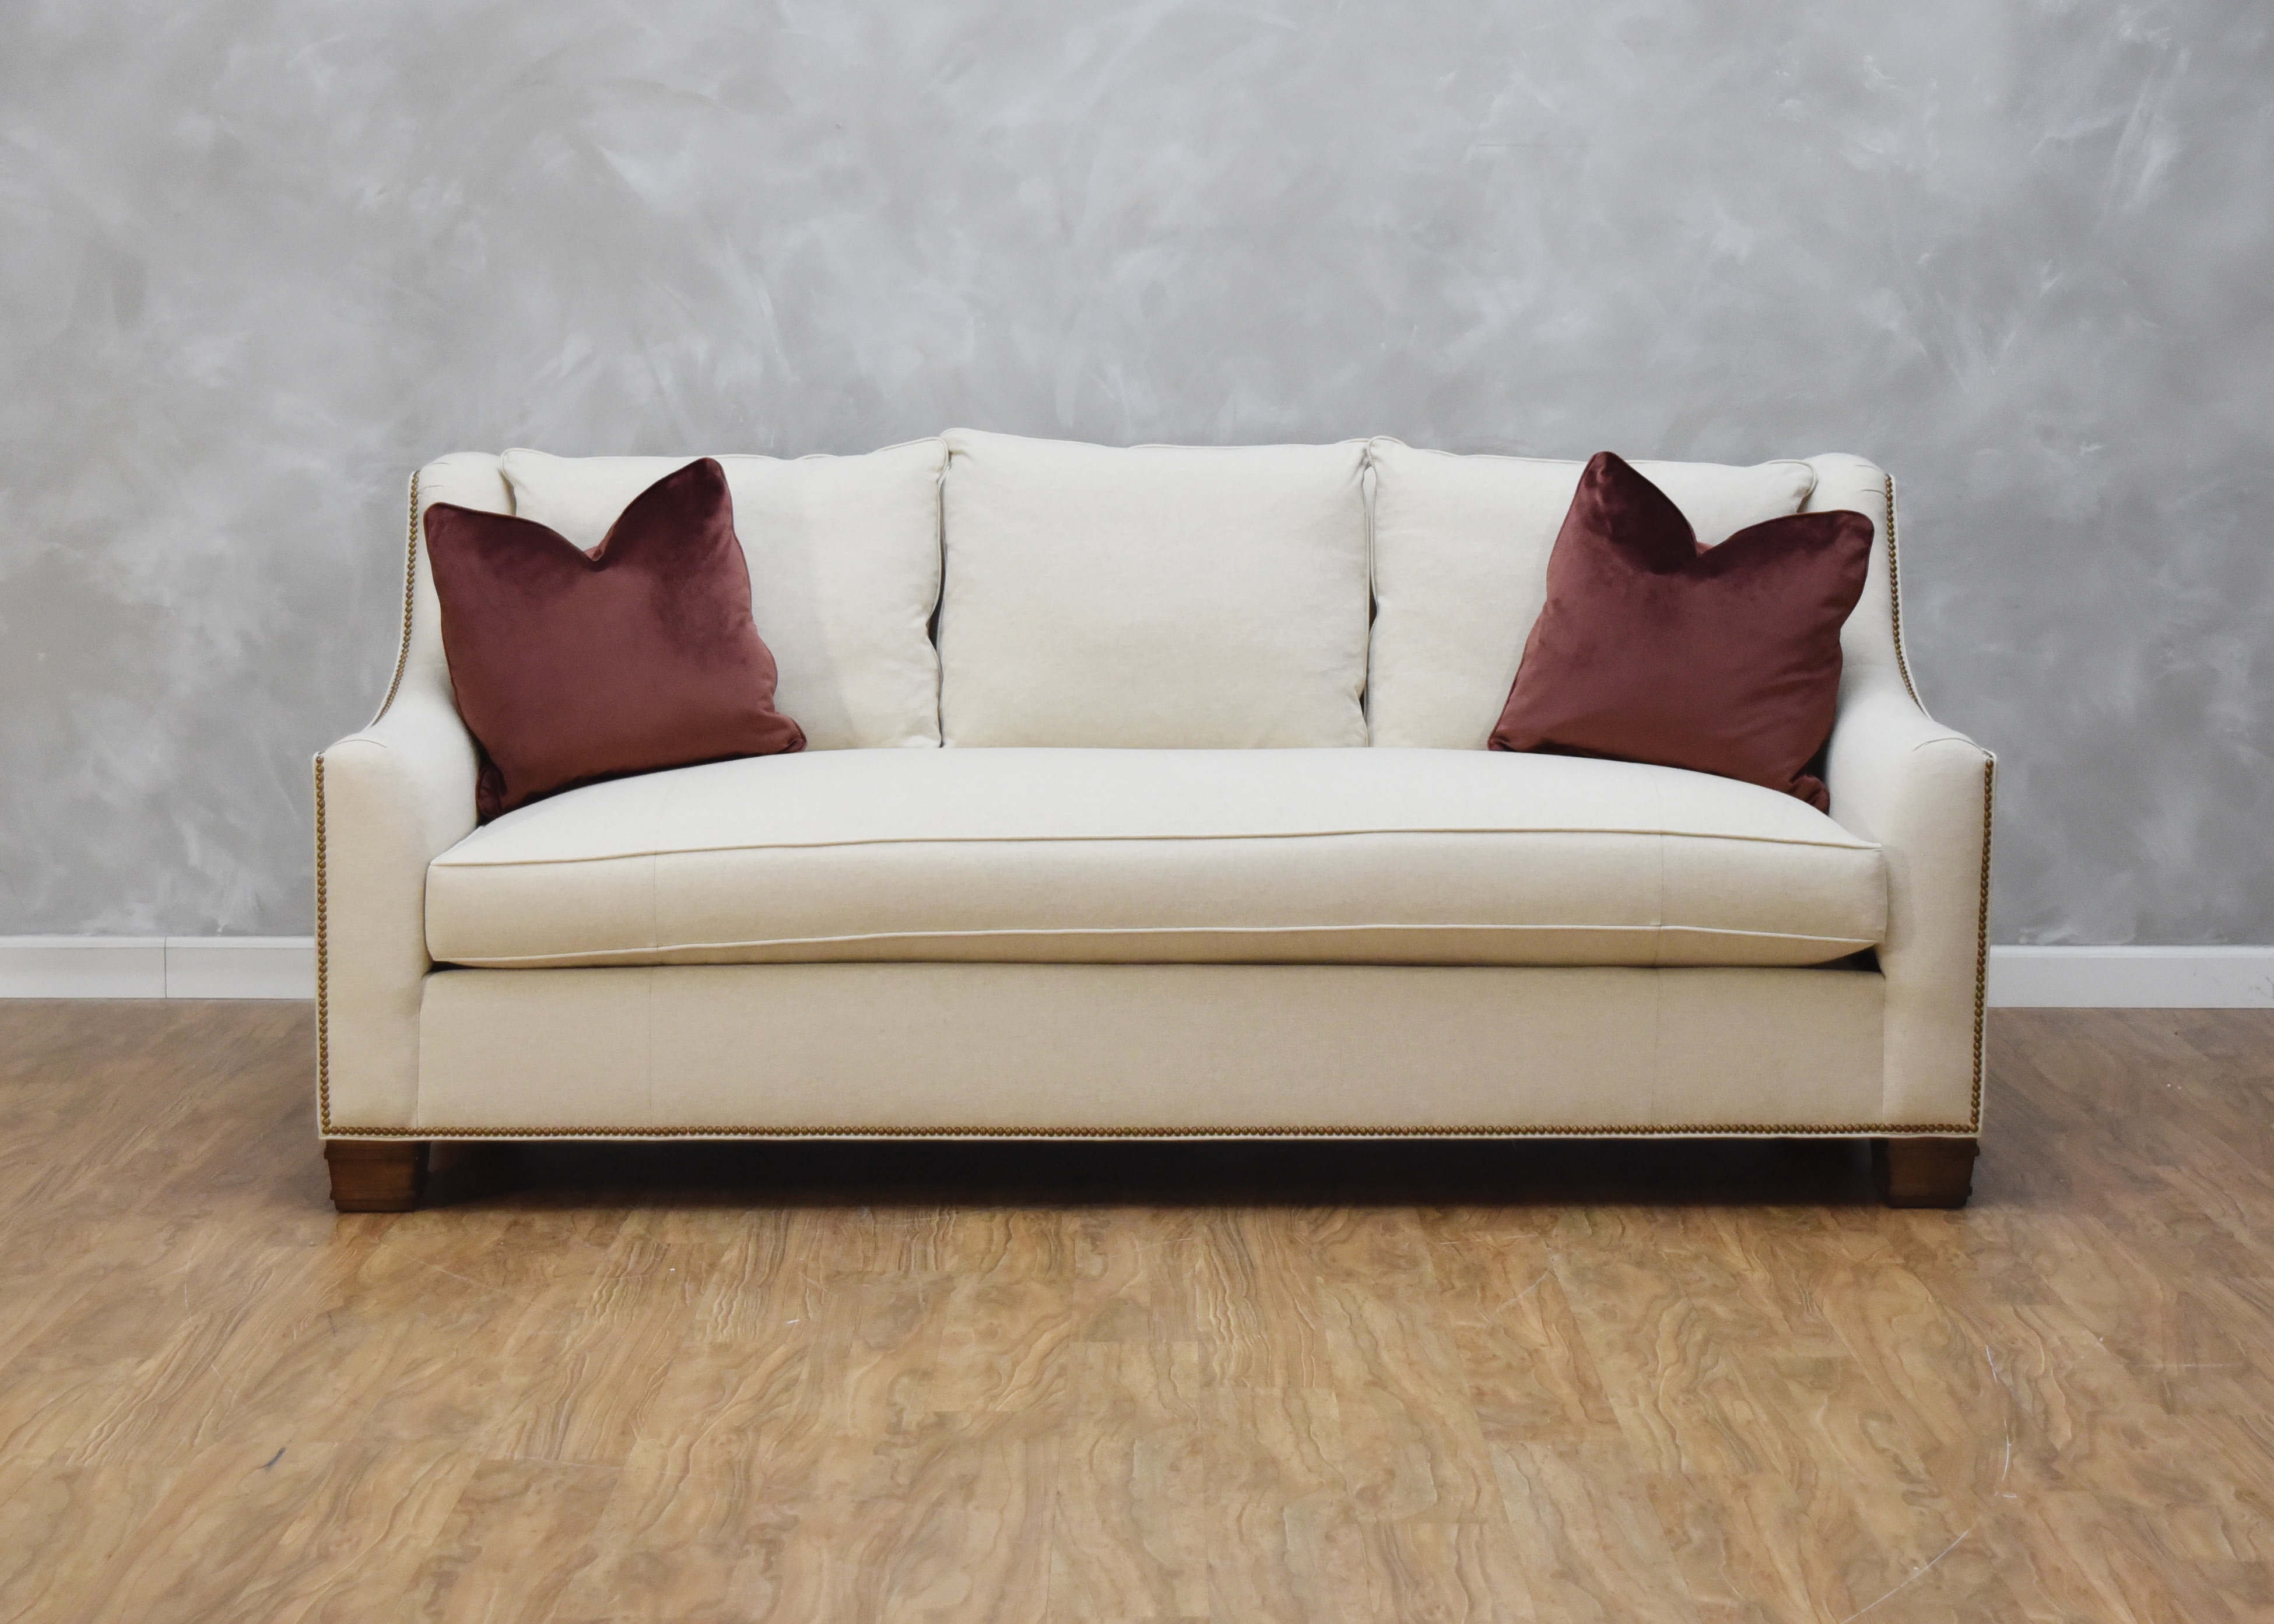 Modern Hickory Chair Sofa Cost for Large Space